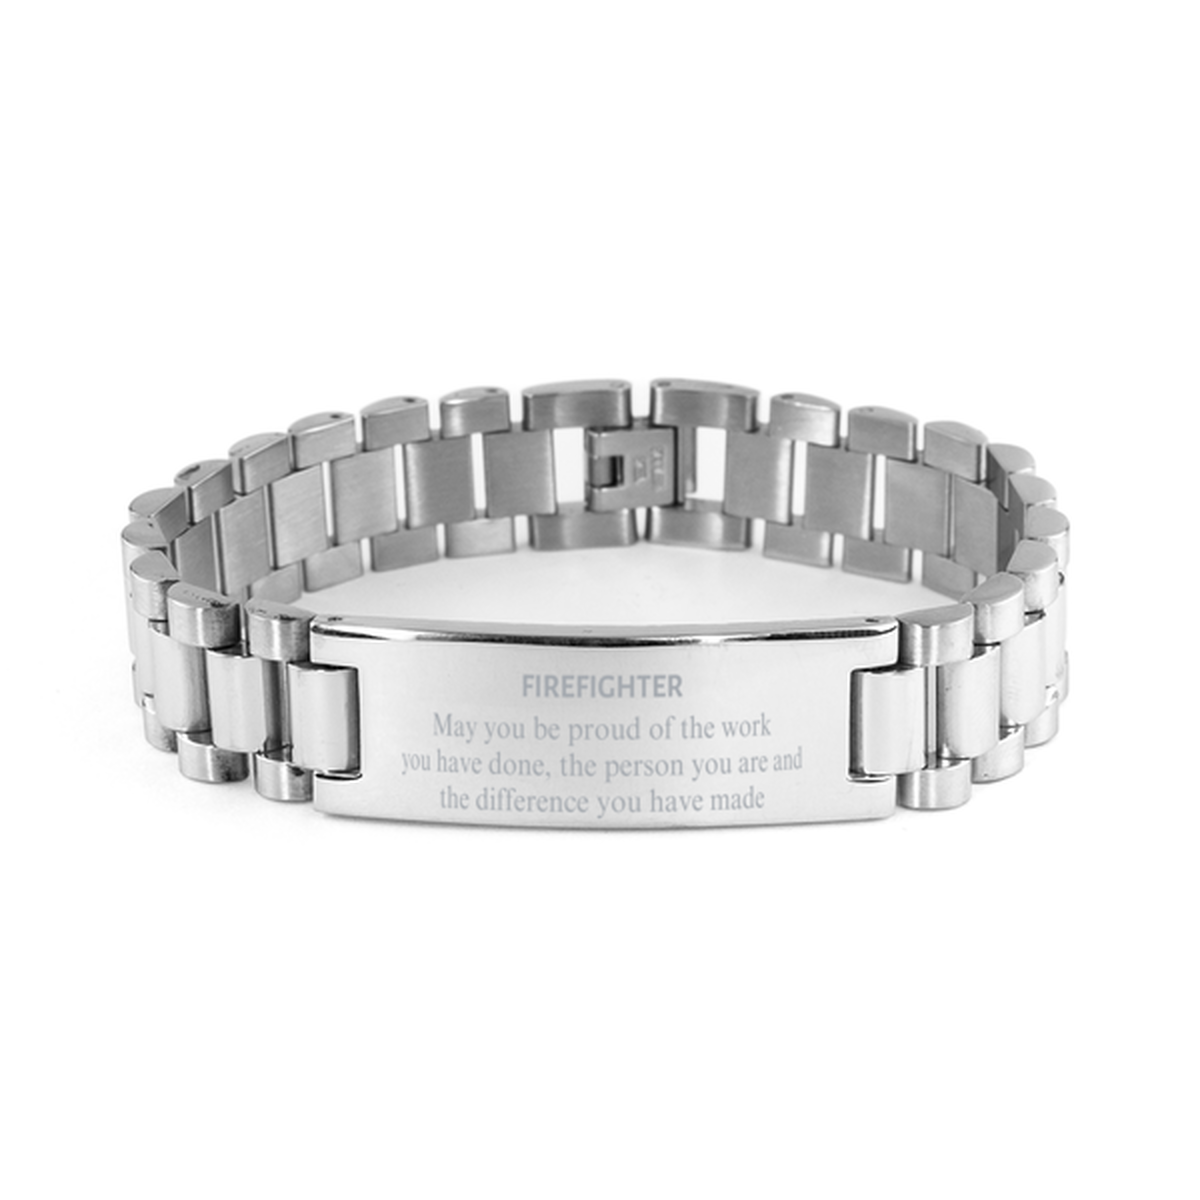 Firefighter May you be proud of the work you have done, Retirement Firefighter Ladder Stainless Steel Bracelet for Colleague Appreciation Gifts Amazing for Firefighter